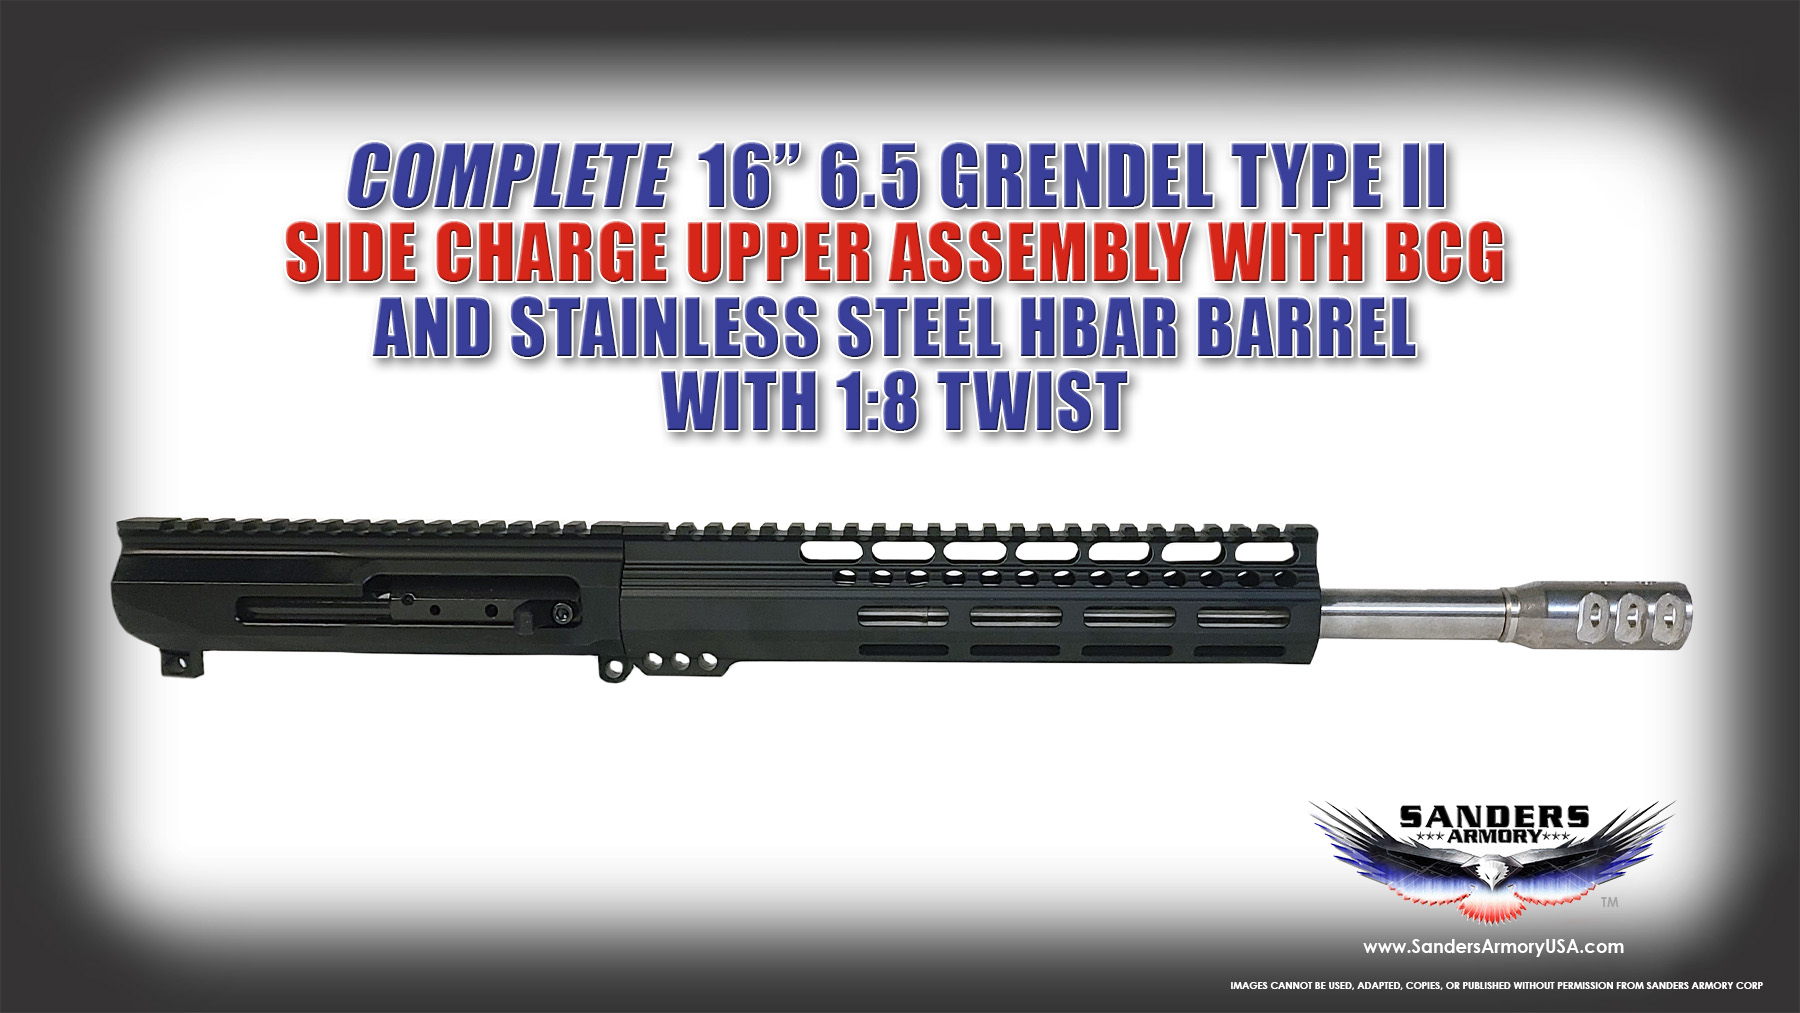 Sanders Armory 16 6.5 SS Side Charge Grendel Upper